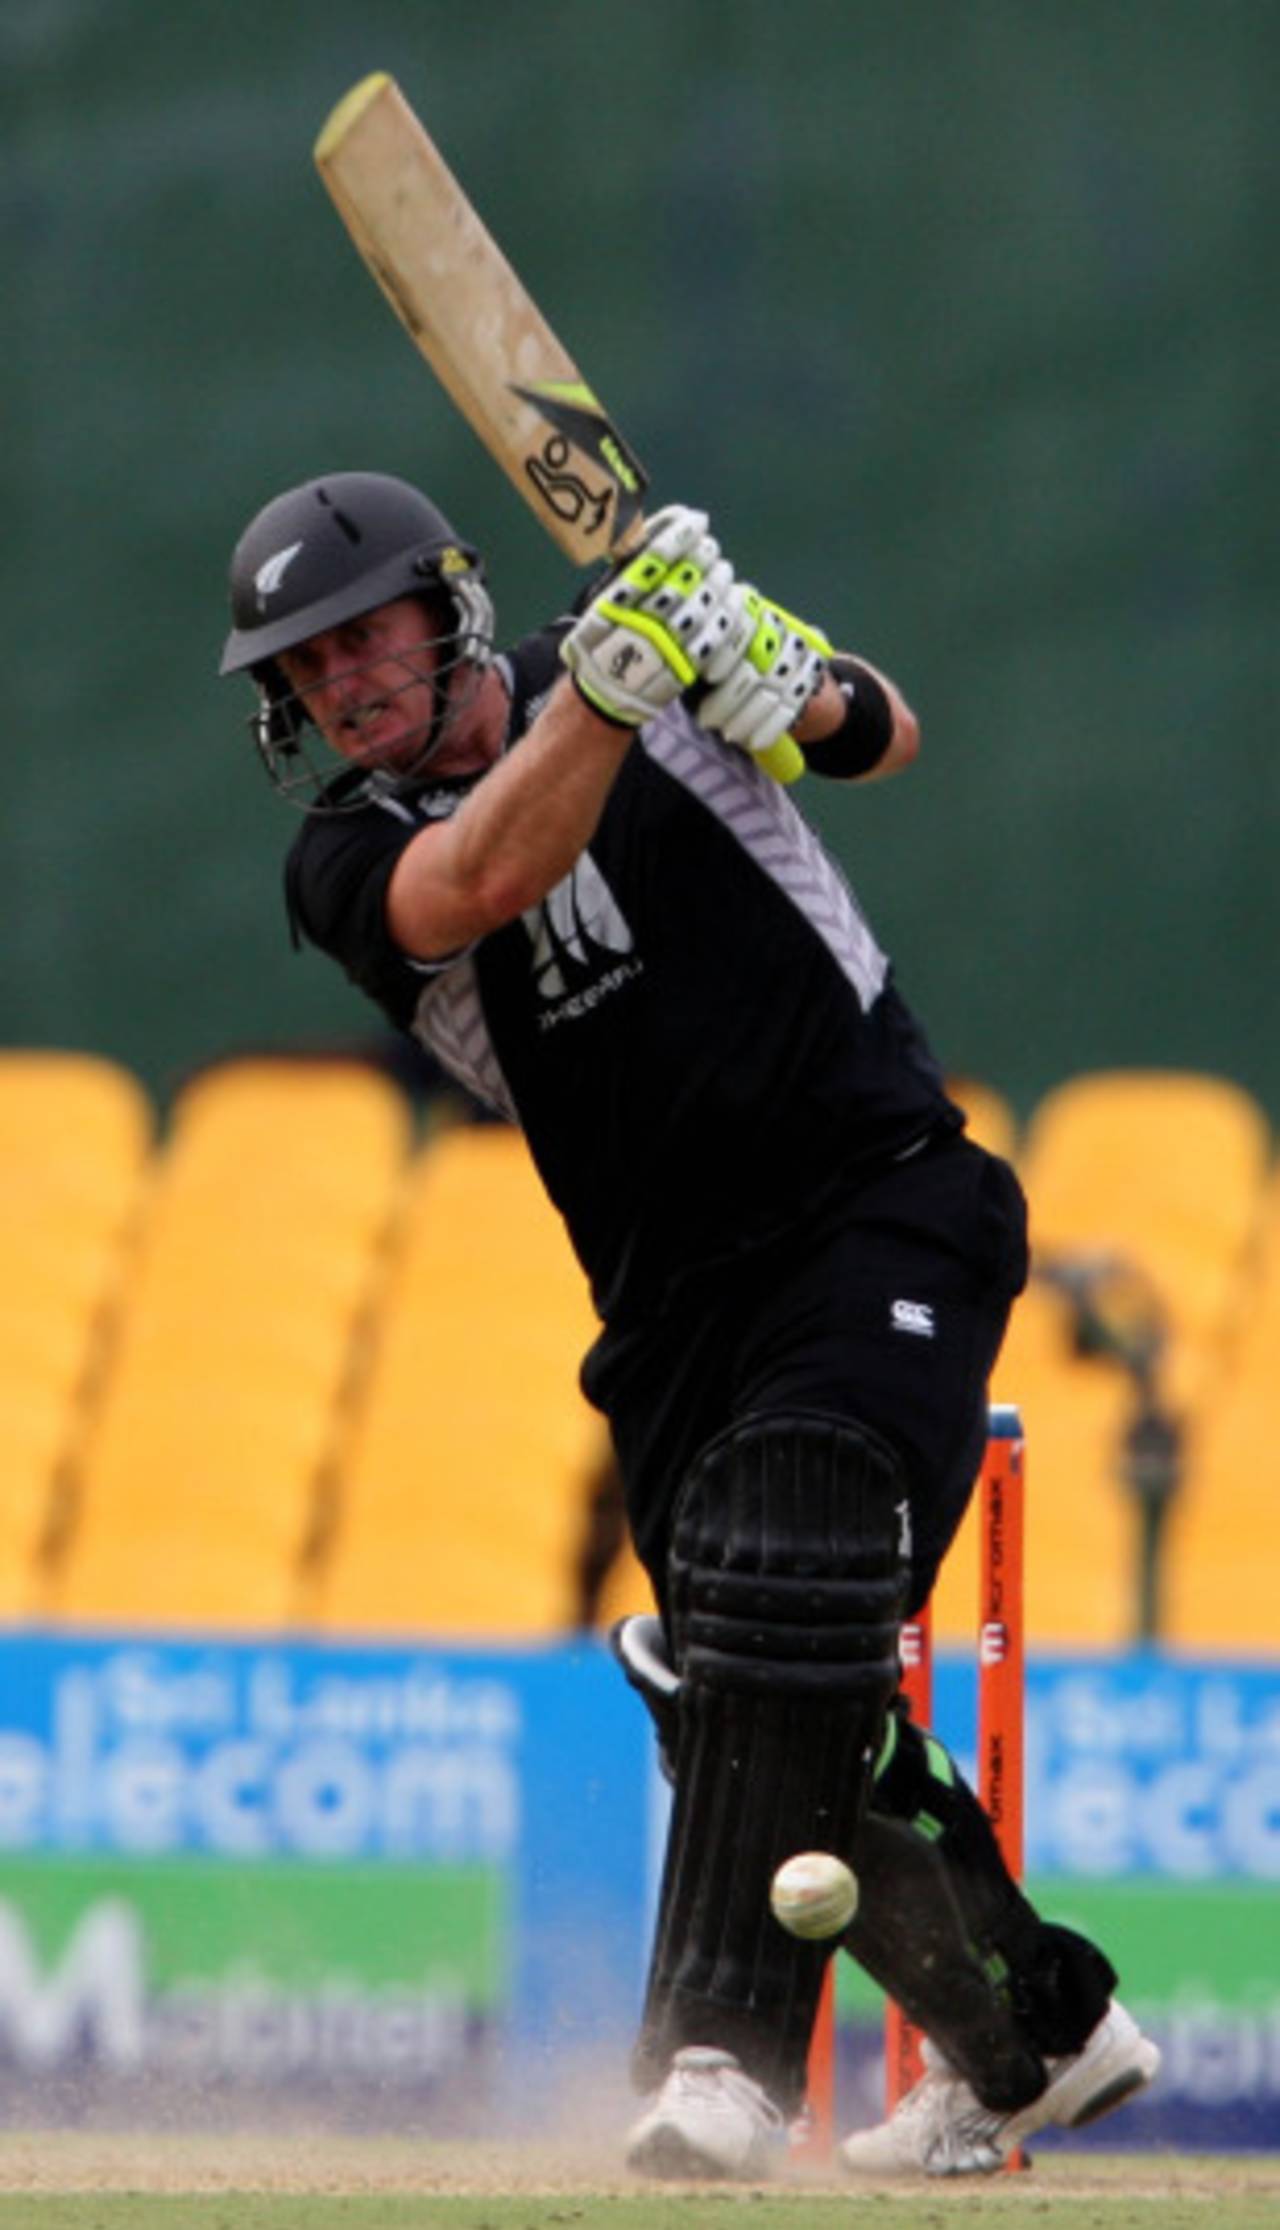 After two international comebacks at the age of 34, Scott Styris is now an integral part of New Zealand's World Cup plans&nbsp;&nbsp;&bull;&nbsp;&nbsp;Cameraworx/Live Images